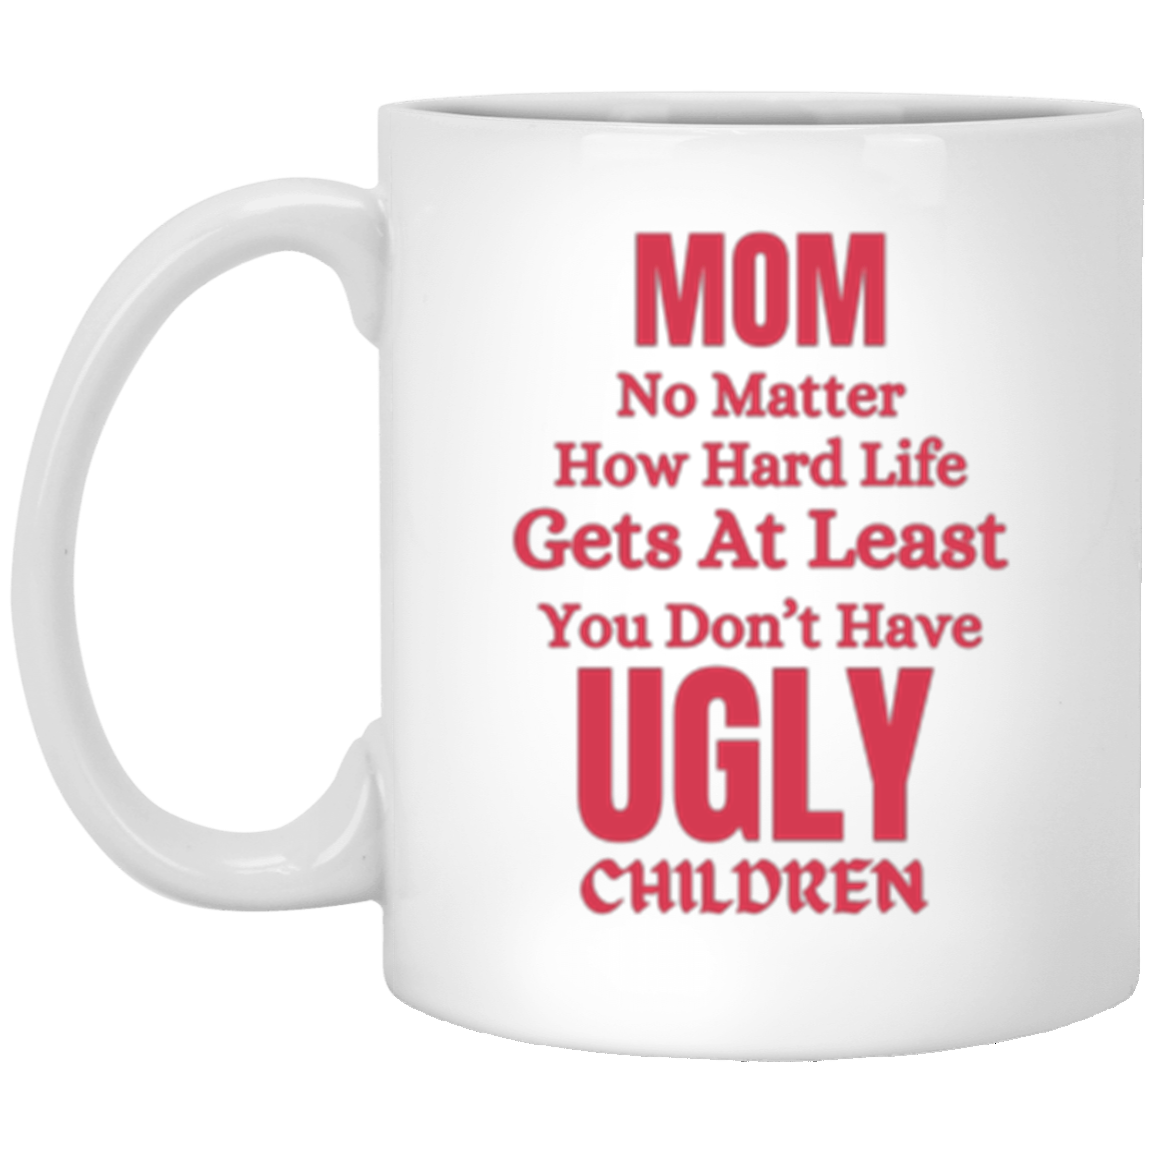 MOM | Ugly Children | 11oz White Mug | Give your Mom a Chuckle with this Cute Mug